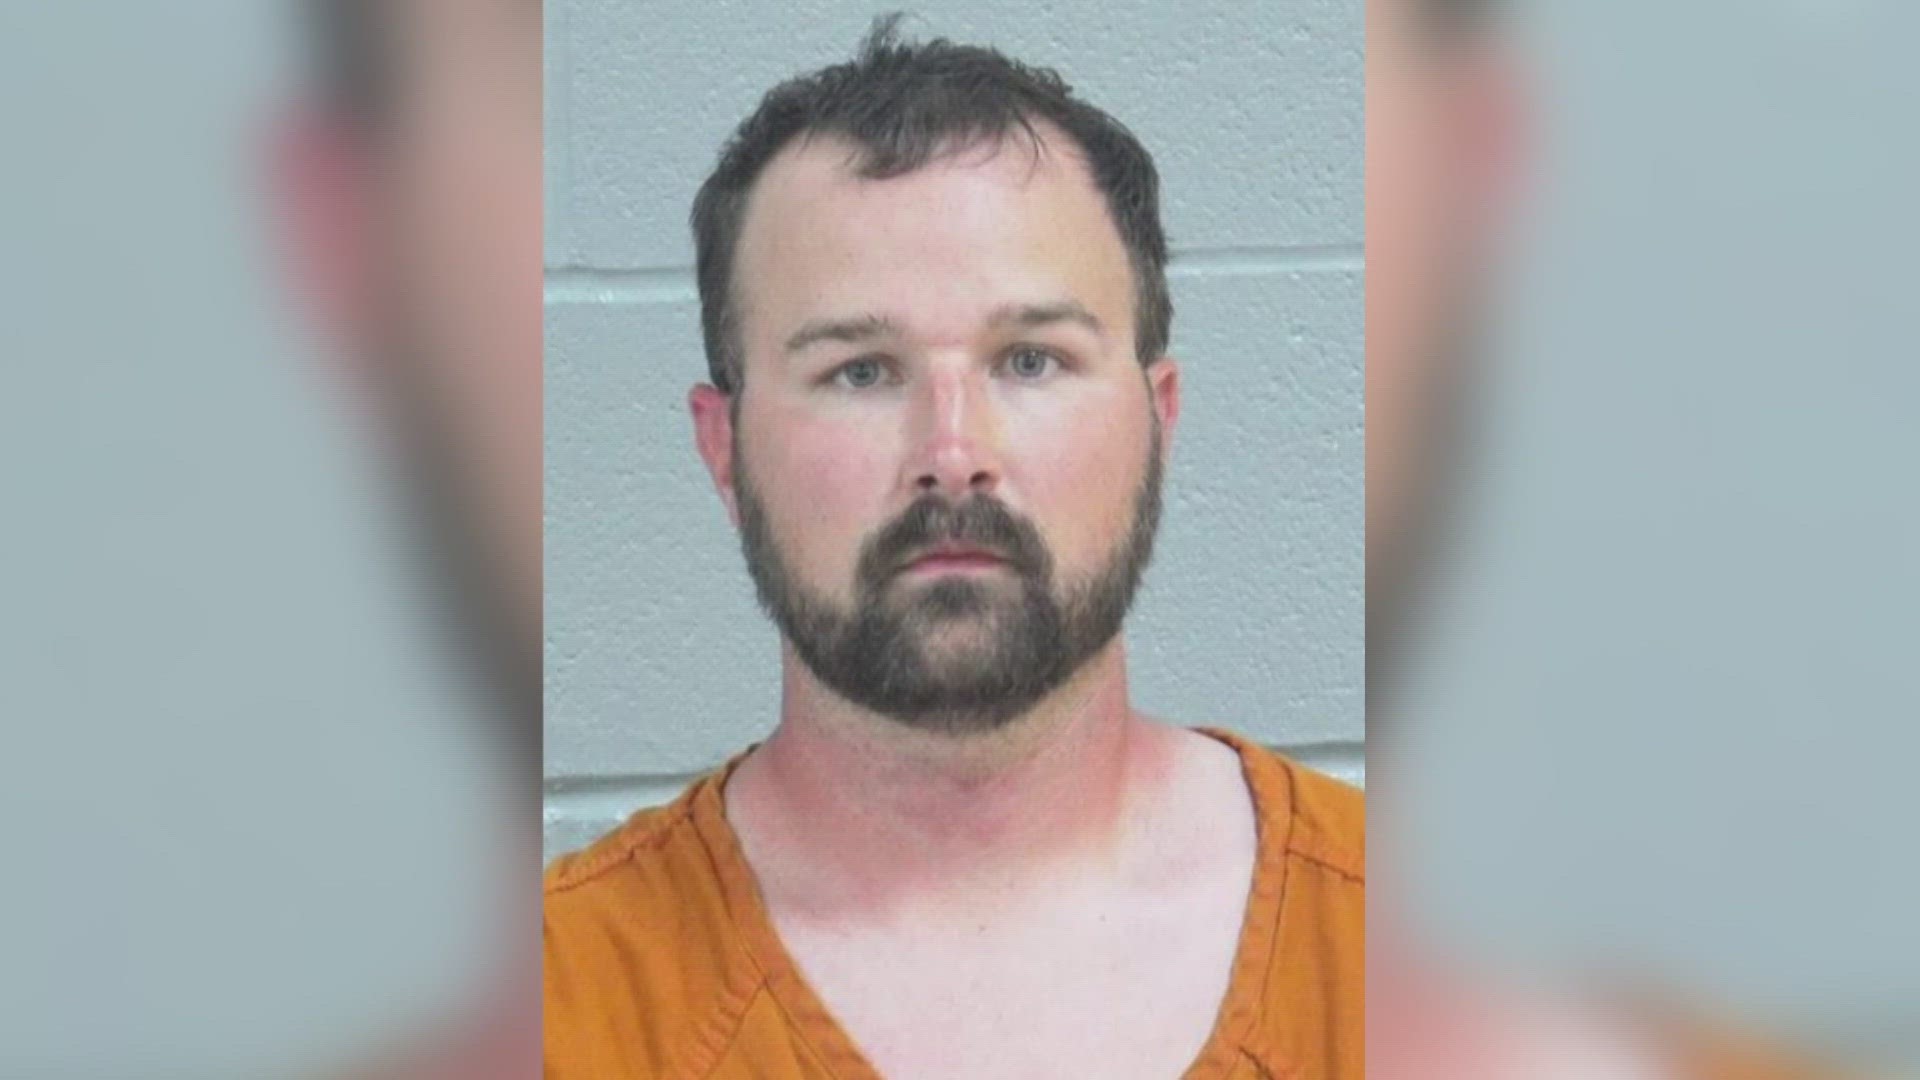 The 33-year-old former Midland youth pastor could face 10 years max in prison and up to life of supervised released.